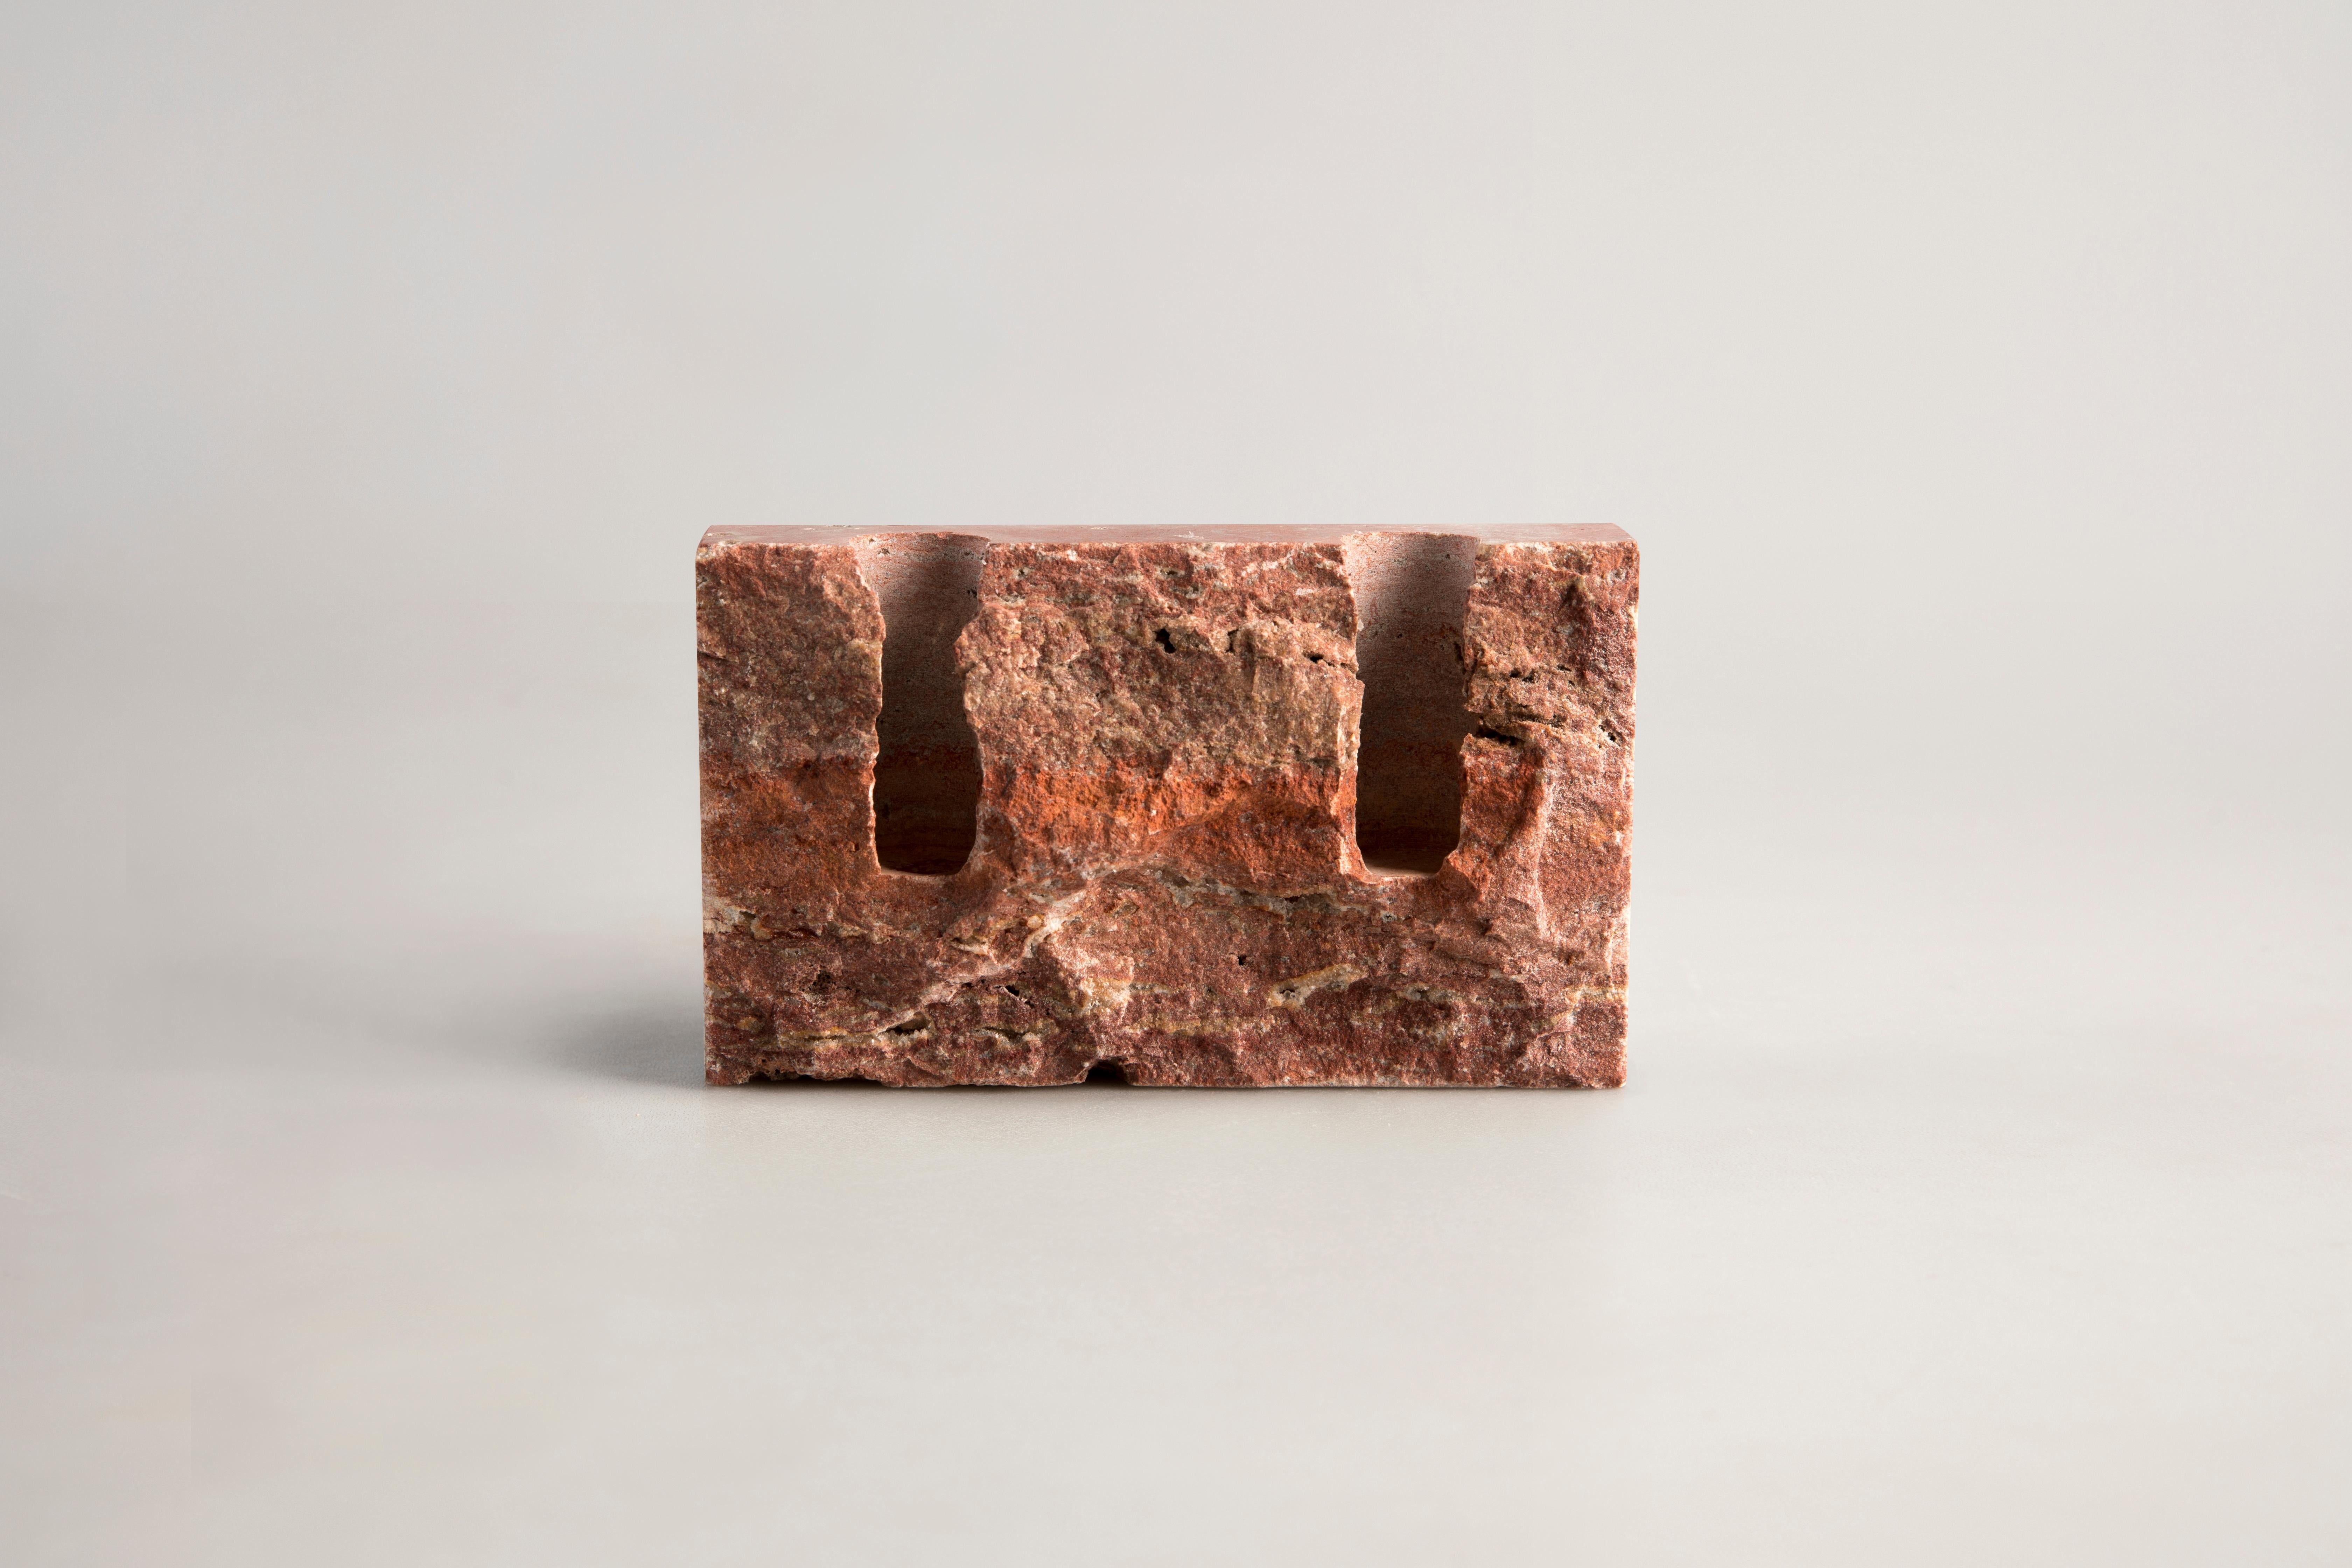 Red Travertine sculpted candleholder by Sanna Völker
The size of the candleholder is 15 x 3 x 9 cm, designed to be used with drip-less candles of size Ø22 mm. 

All pieces are handcrafted in natural stone. This results in variations in colour and